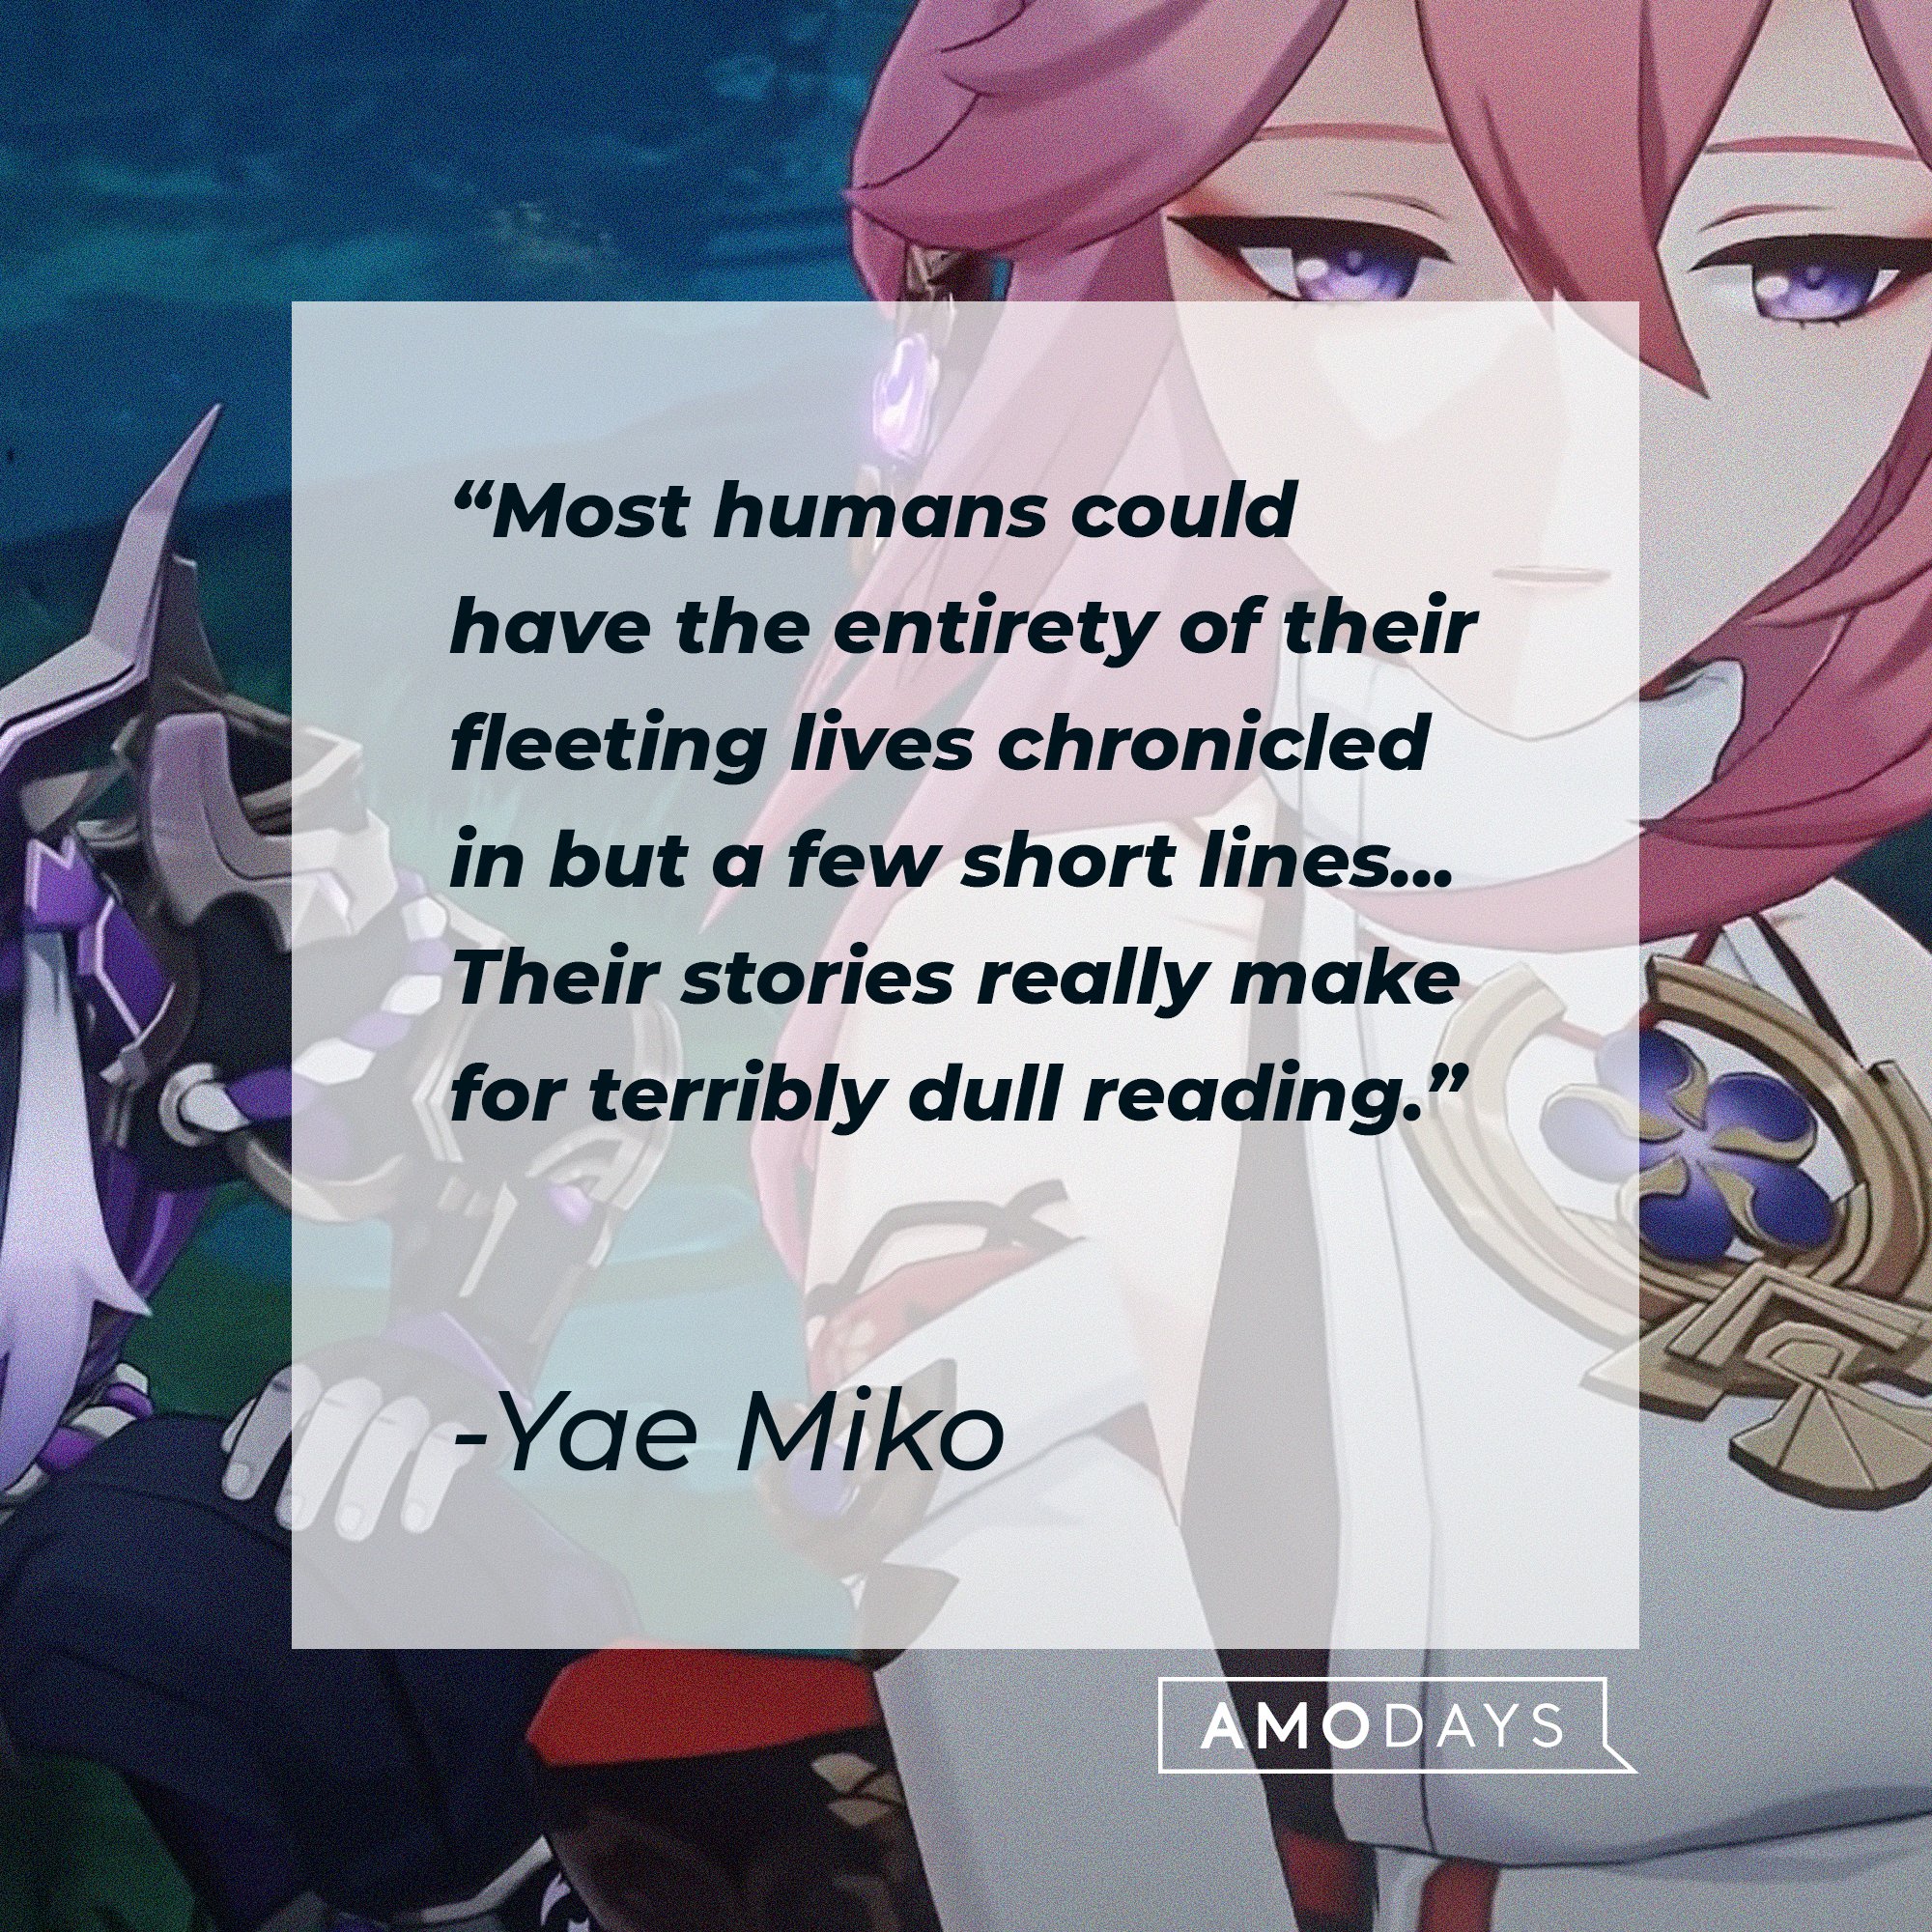 Yae Miko's quote: "Most humans could have the entirety of their fleeting lives chronicled in but a few short lines... Their stories really make for terribly dull reading." | Image: AmoDays